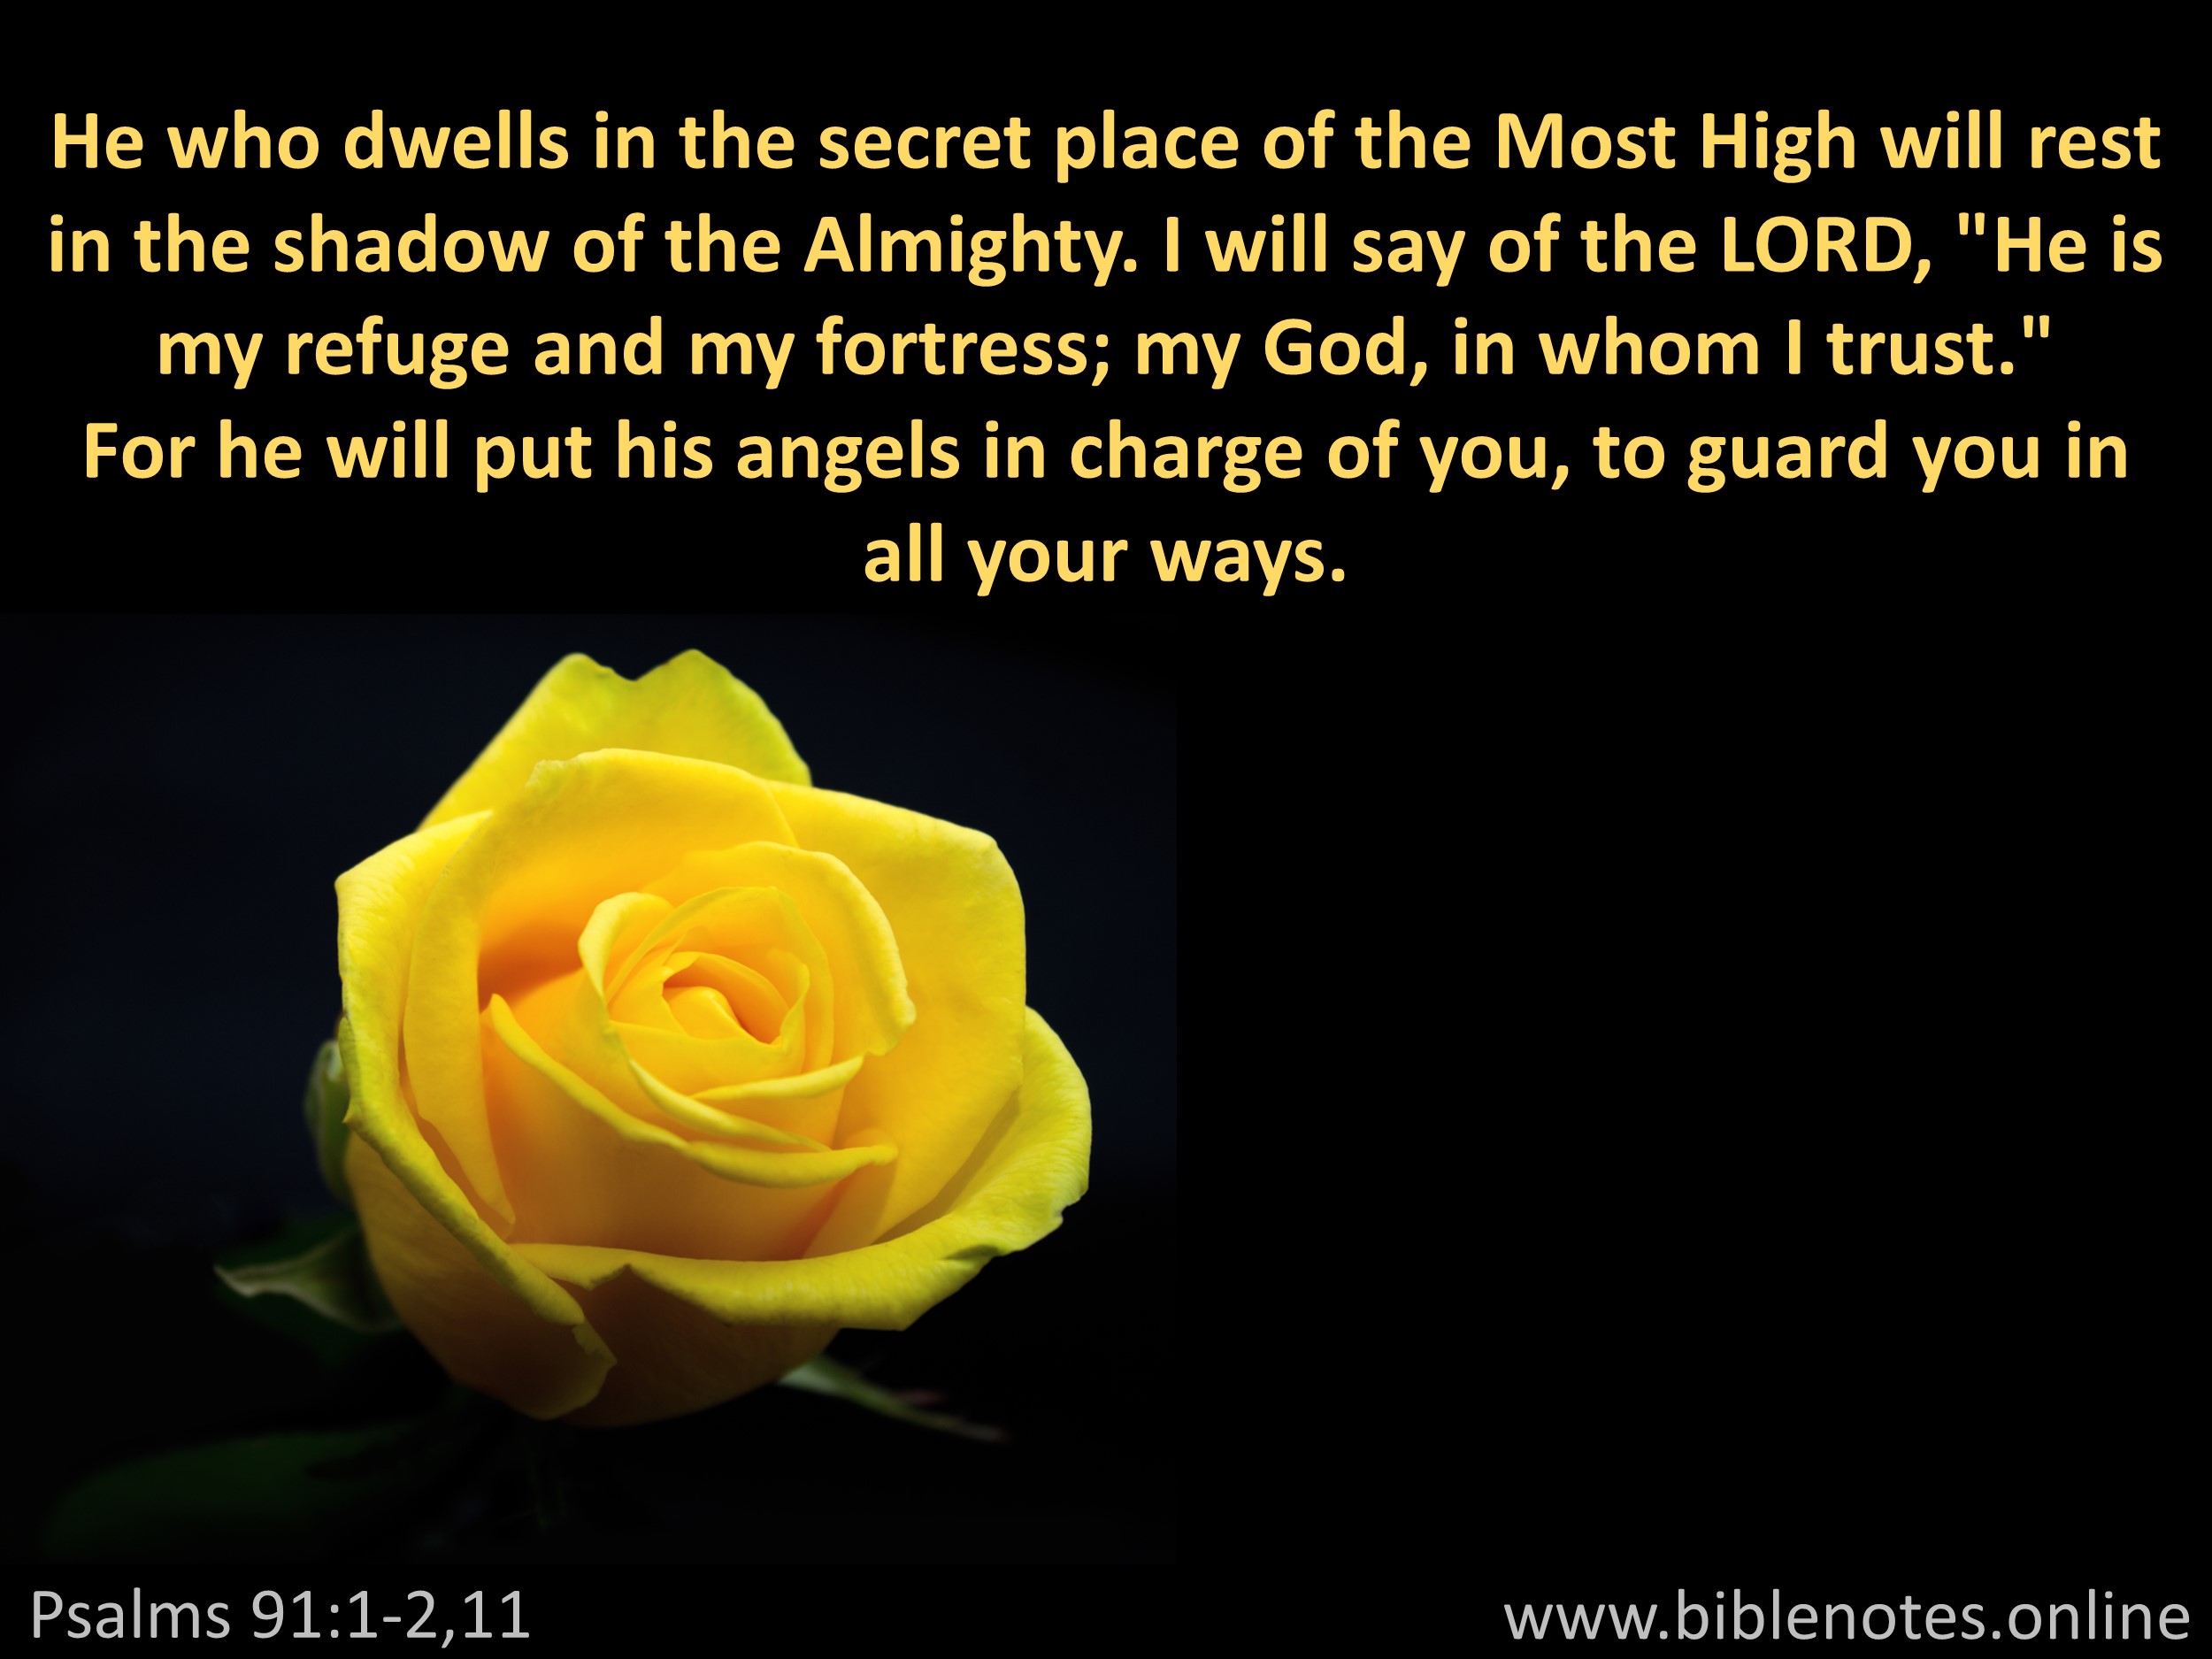 Bible Verse from Psalms Chapter 91